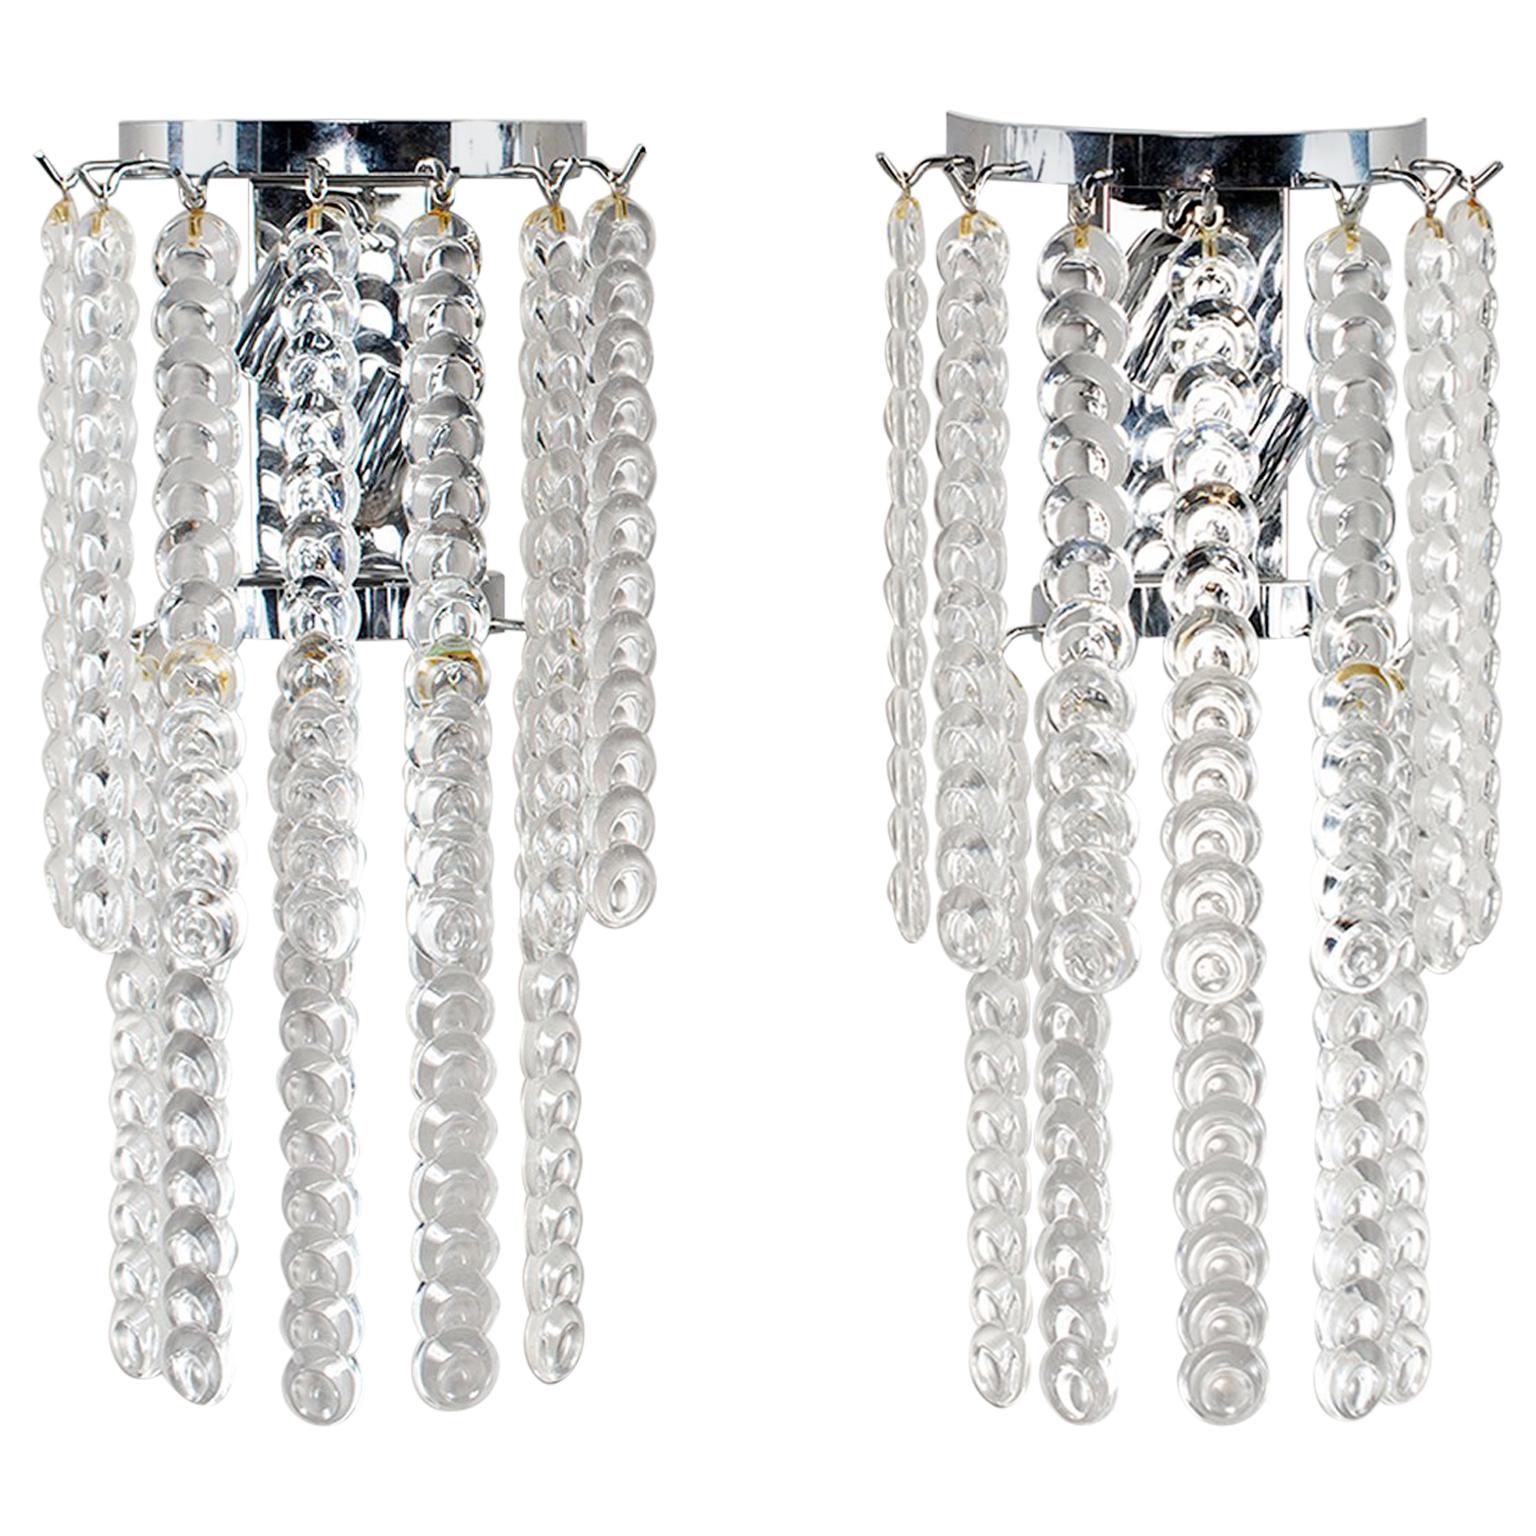 Pair of Murano Glass Sconces with Strands of Clear Glass Disks